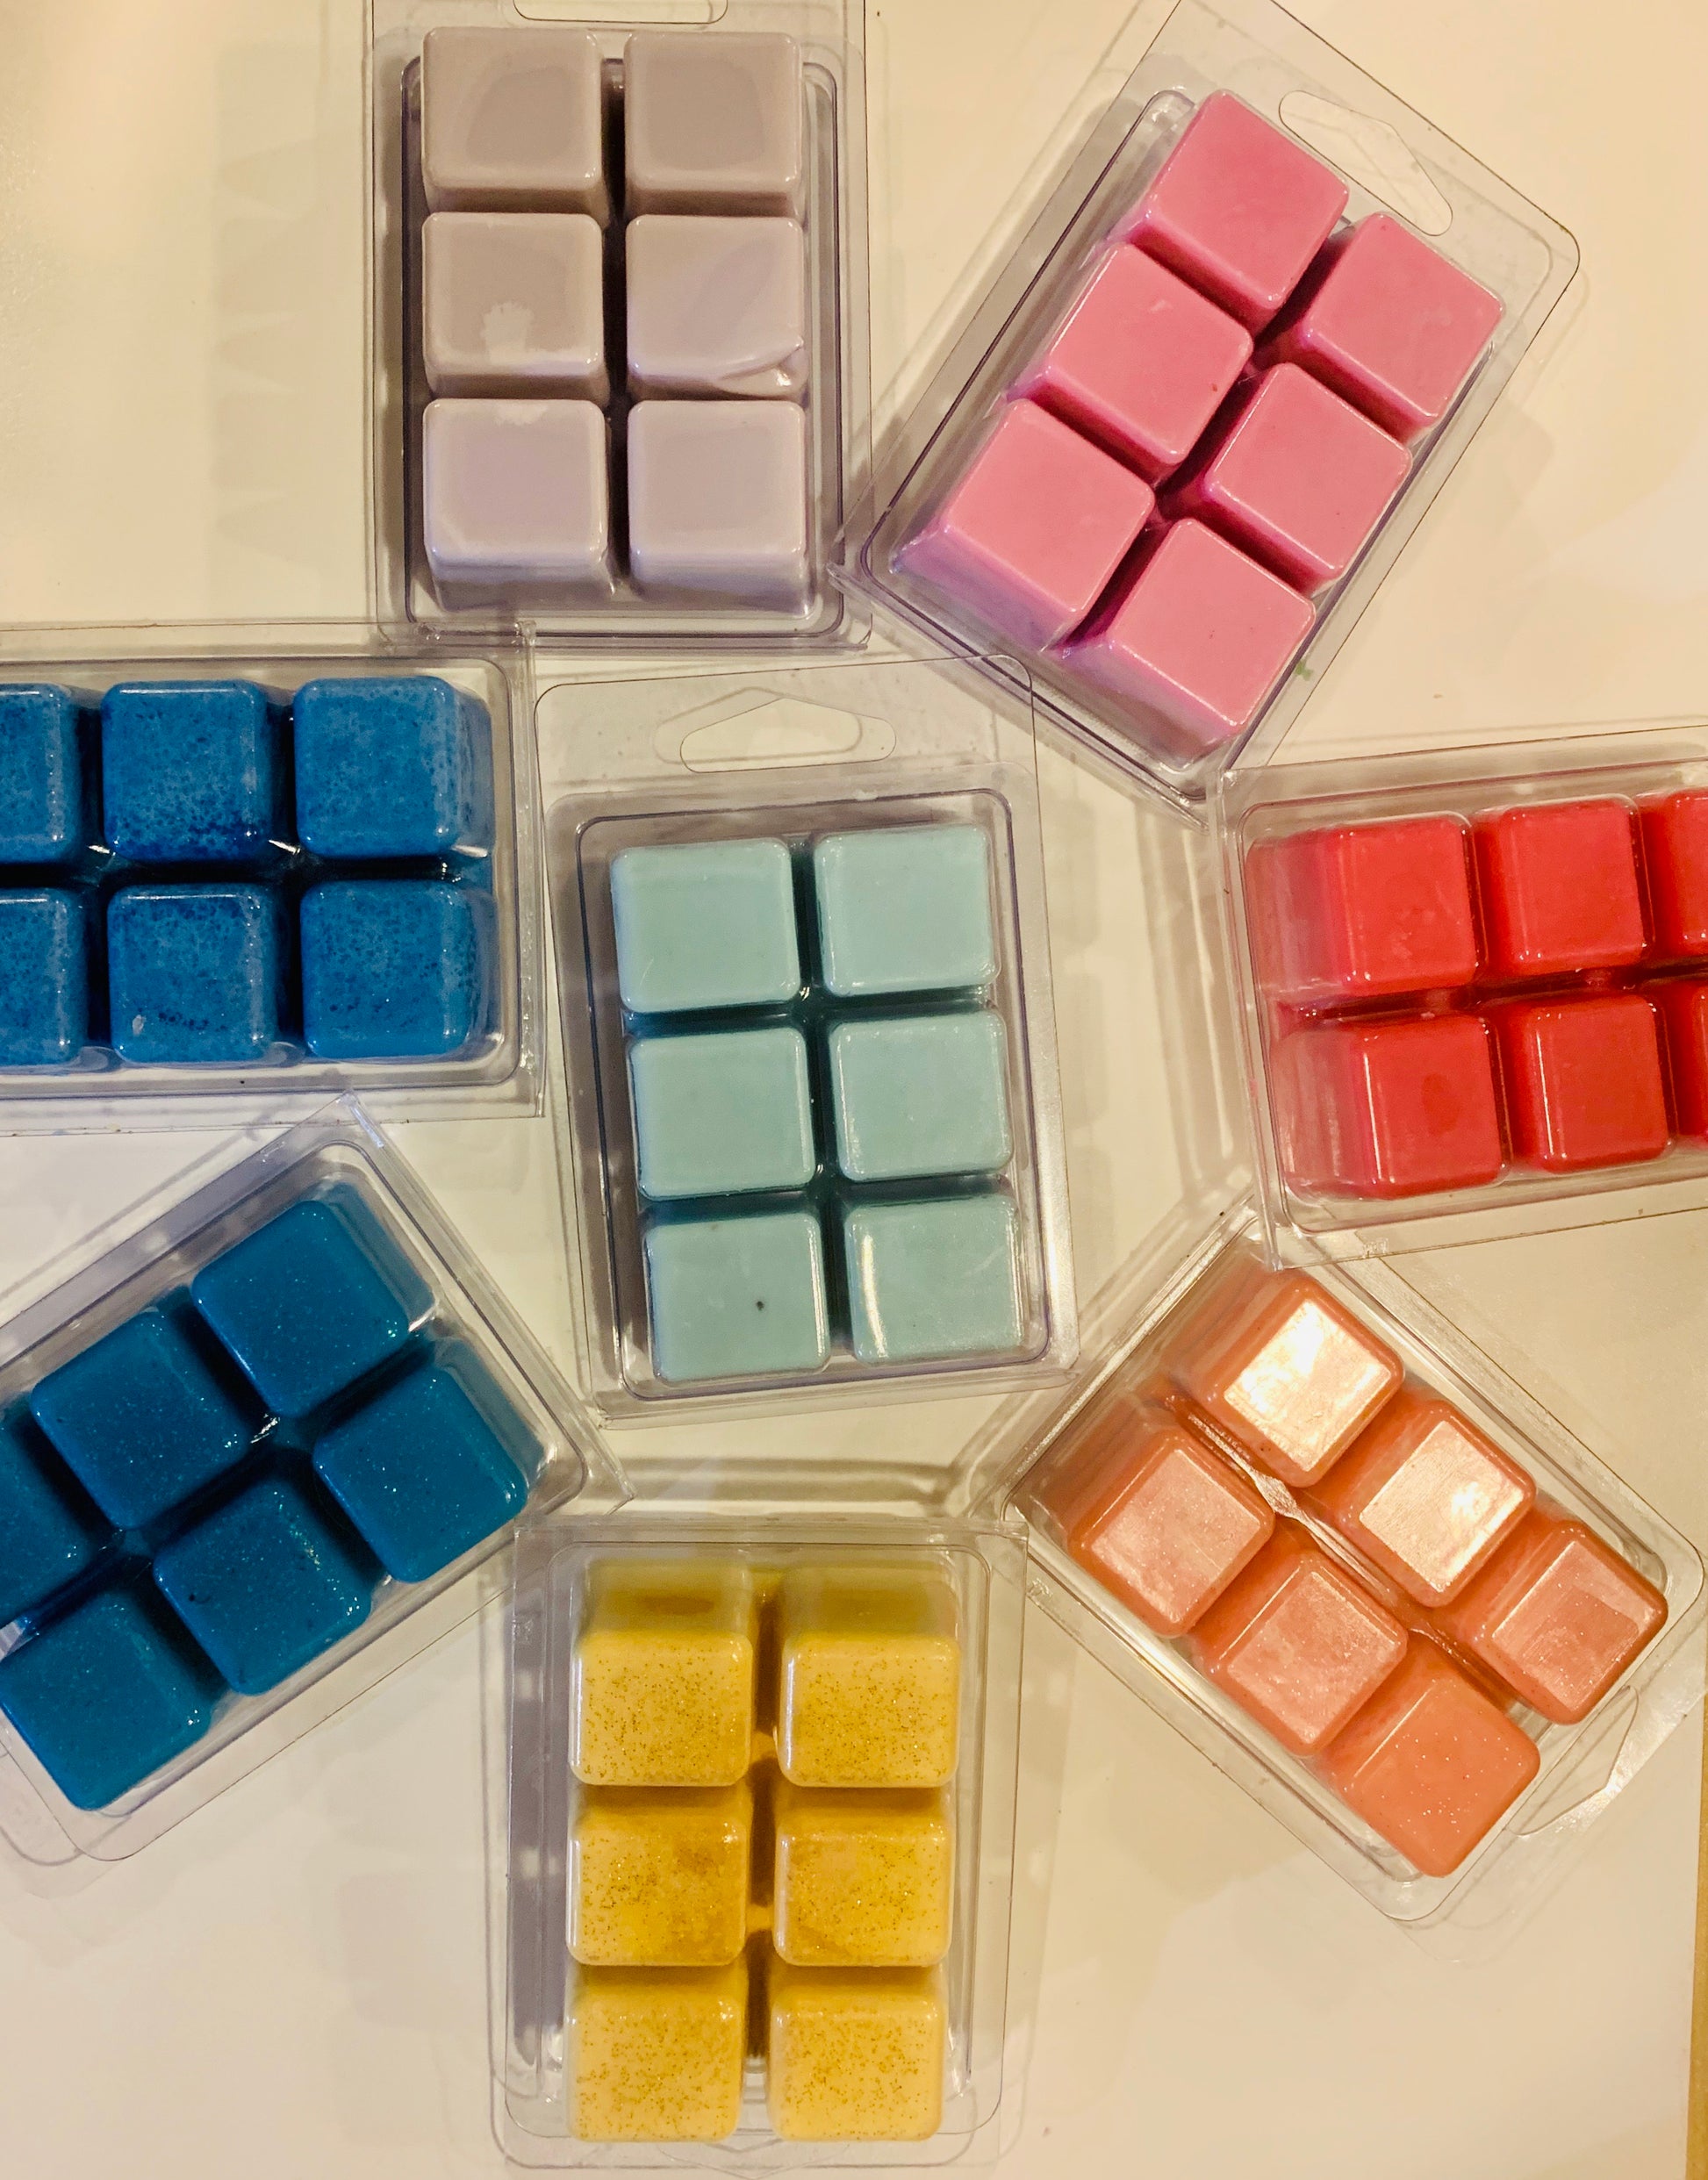 100% Soy Wax Melts - Choose your Scent! long lasting - Wiselyonsoapworks